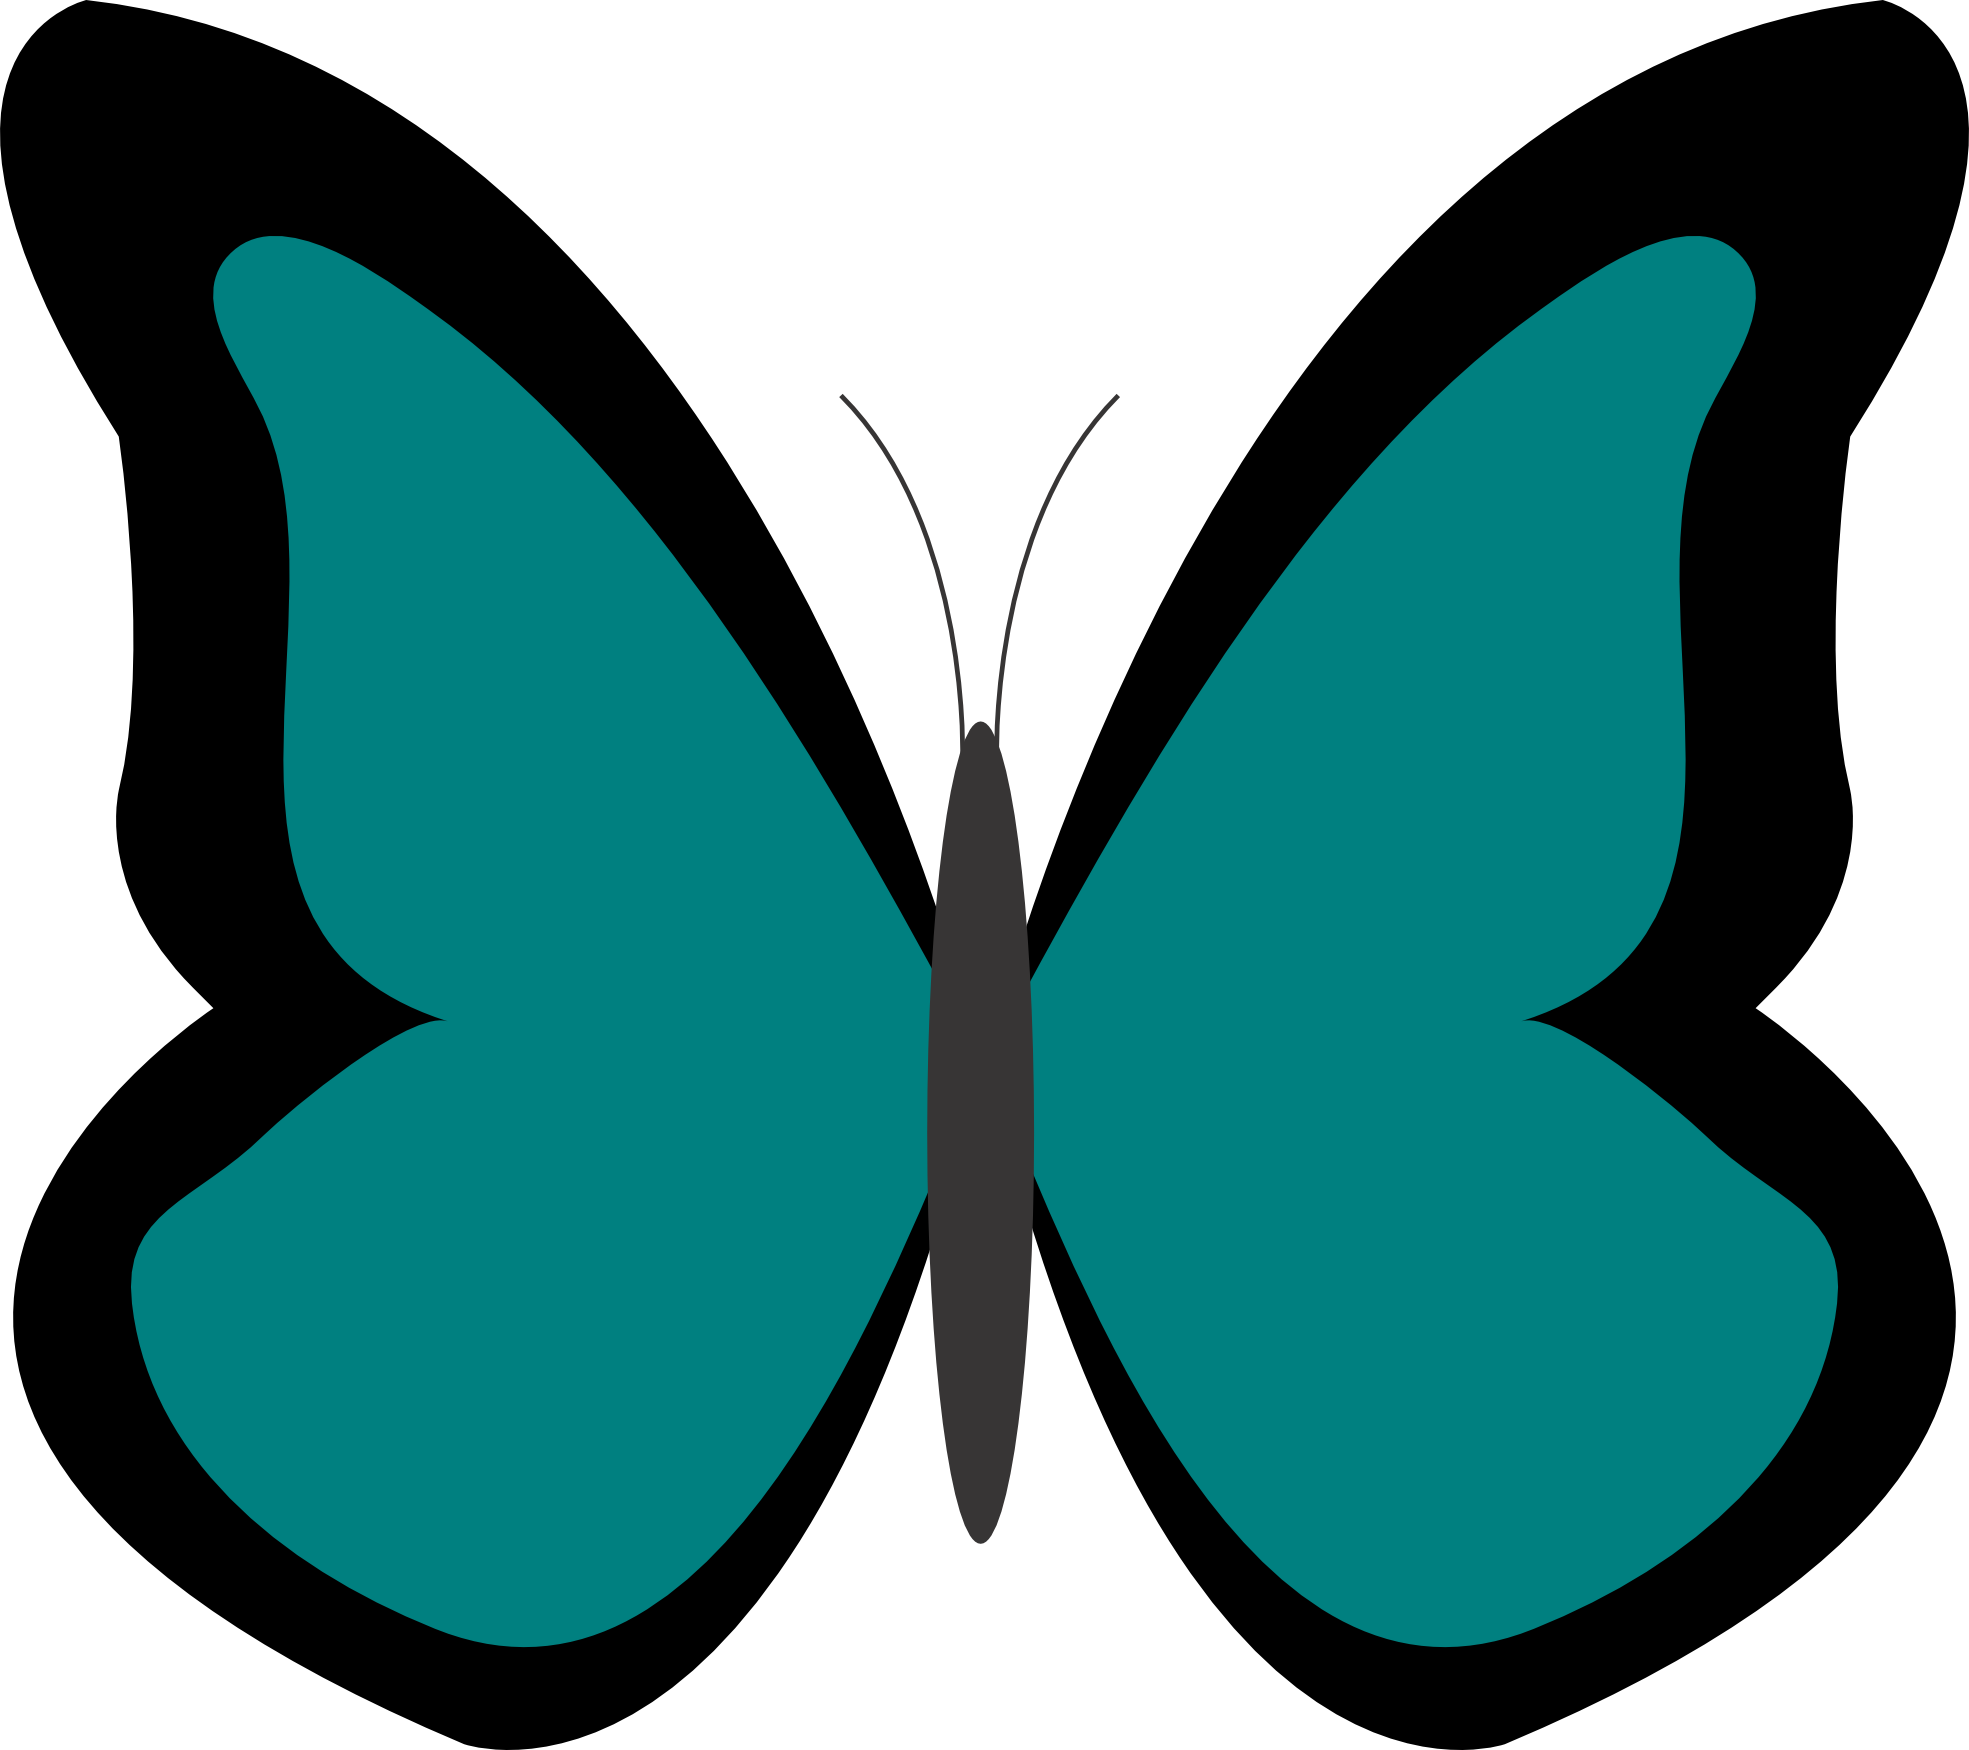 Butterfly 26 Color Colour Teal Peace xochi.info SupaRedonkulous ...